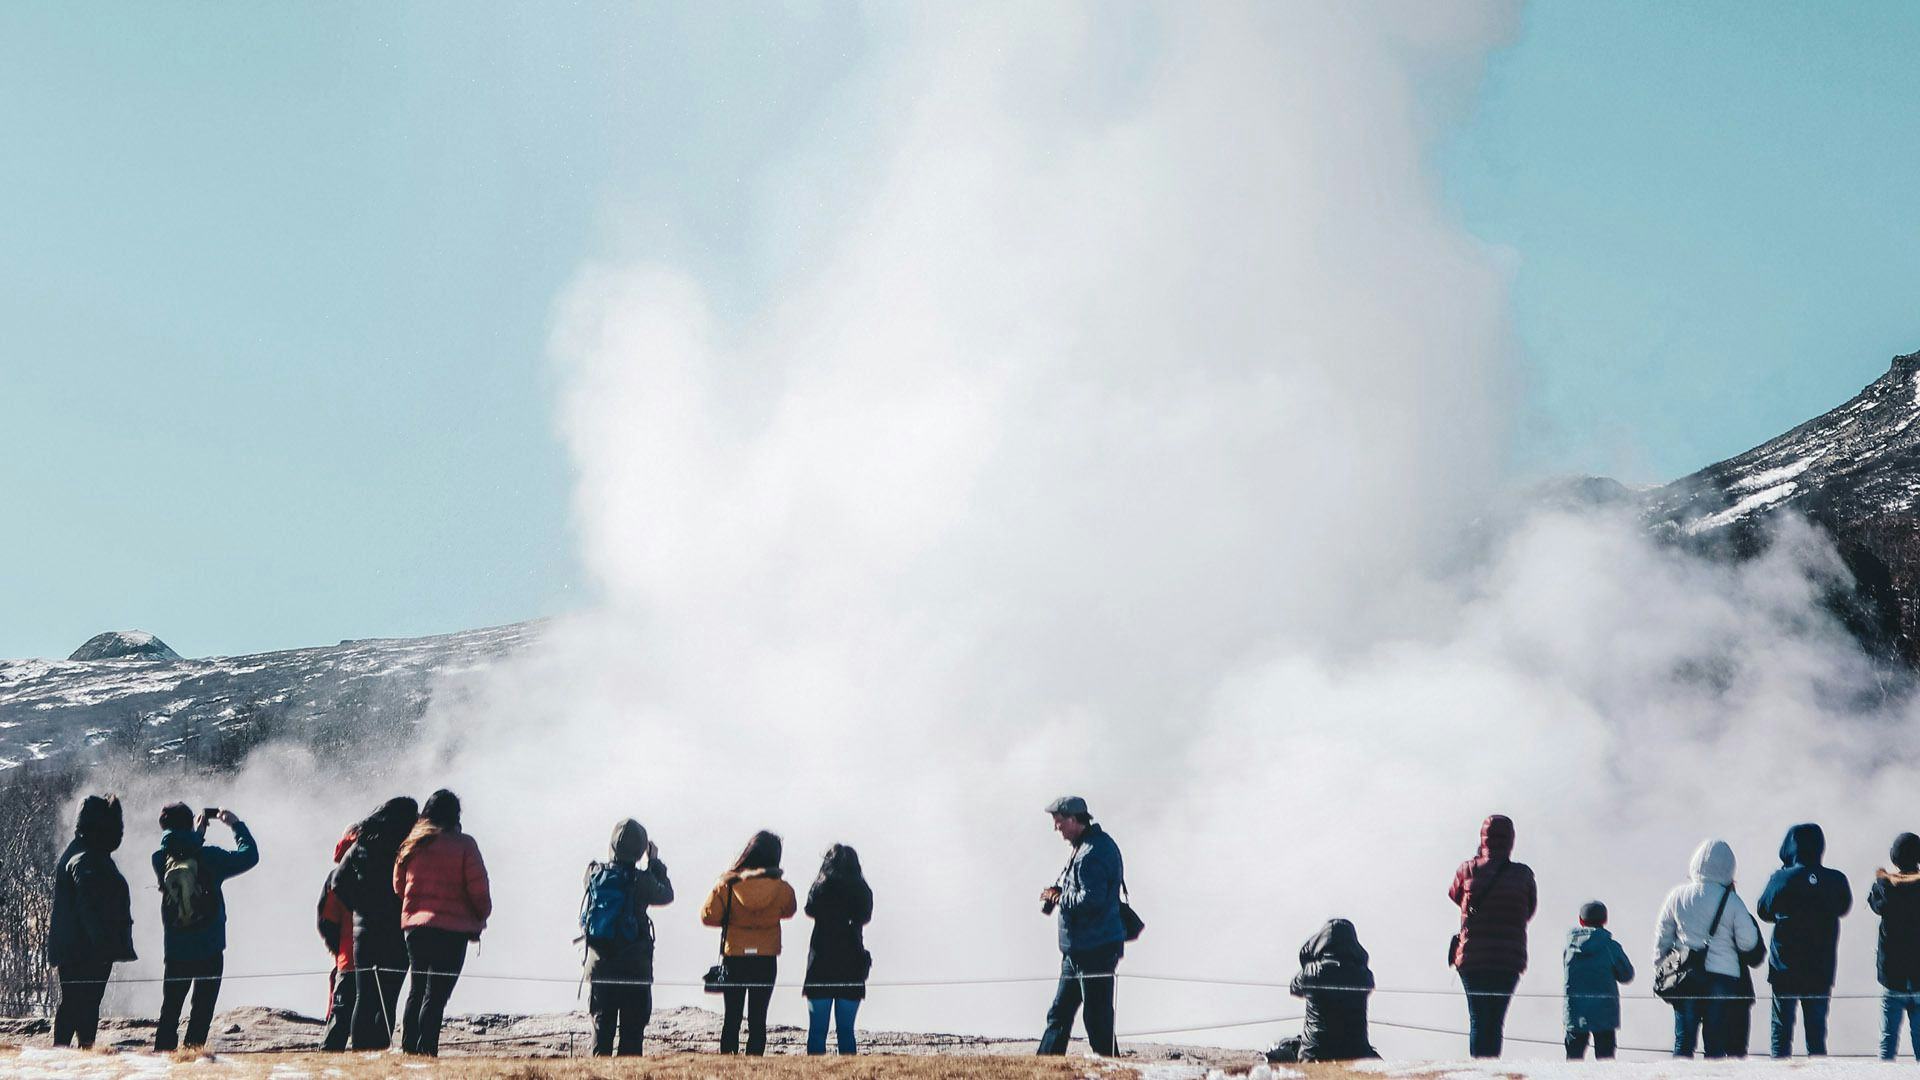 A large group of people observing geyser eruption in a snowy landscape 